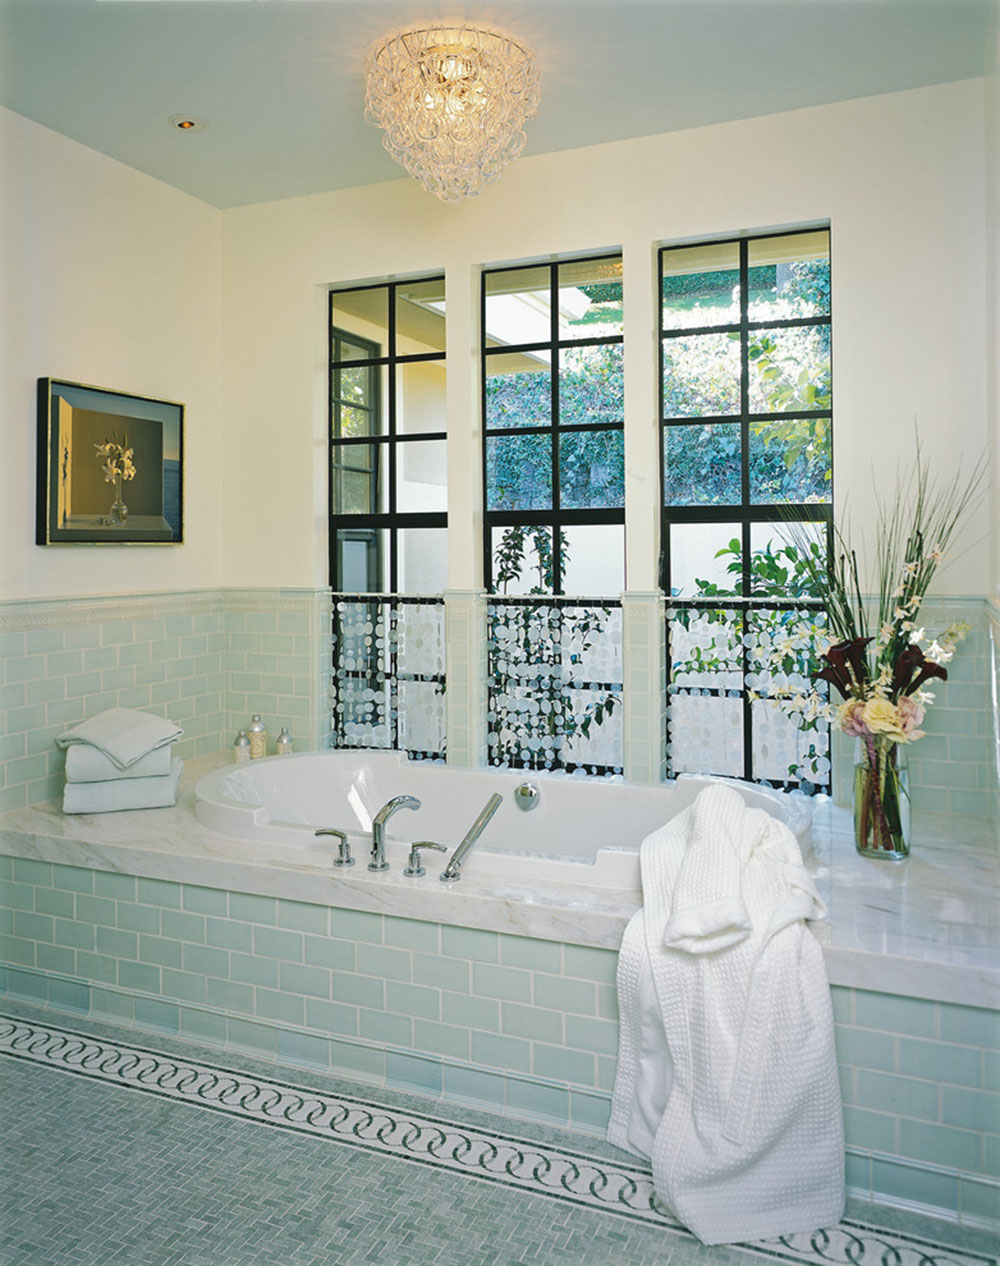 Styling your bathroom should be a priority2 Styling your bathroom should be a priority